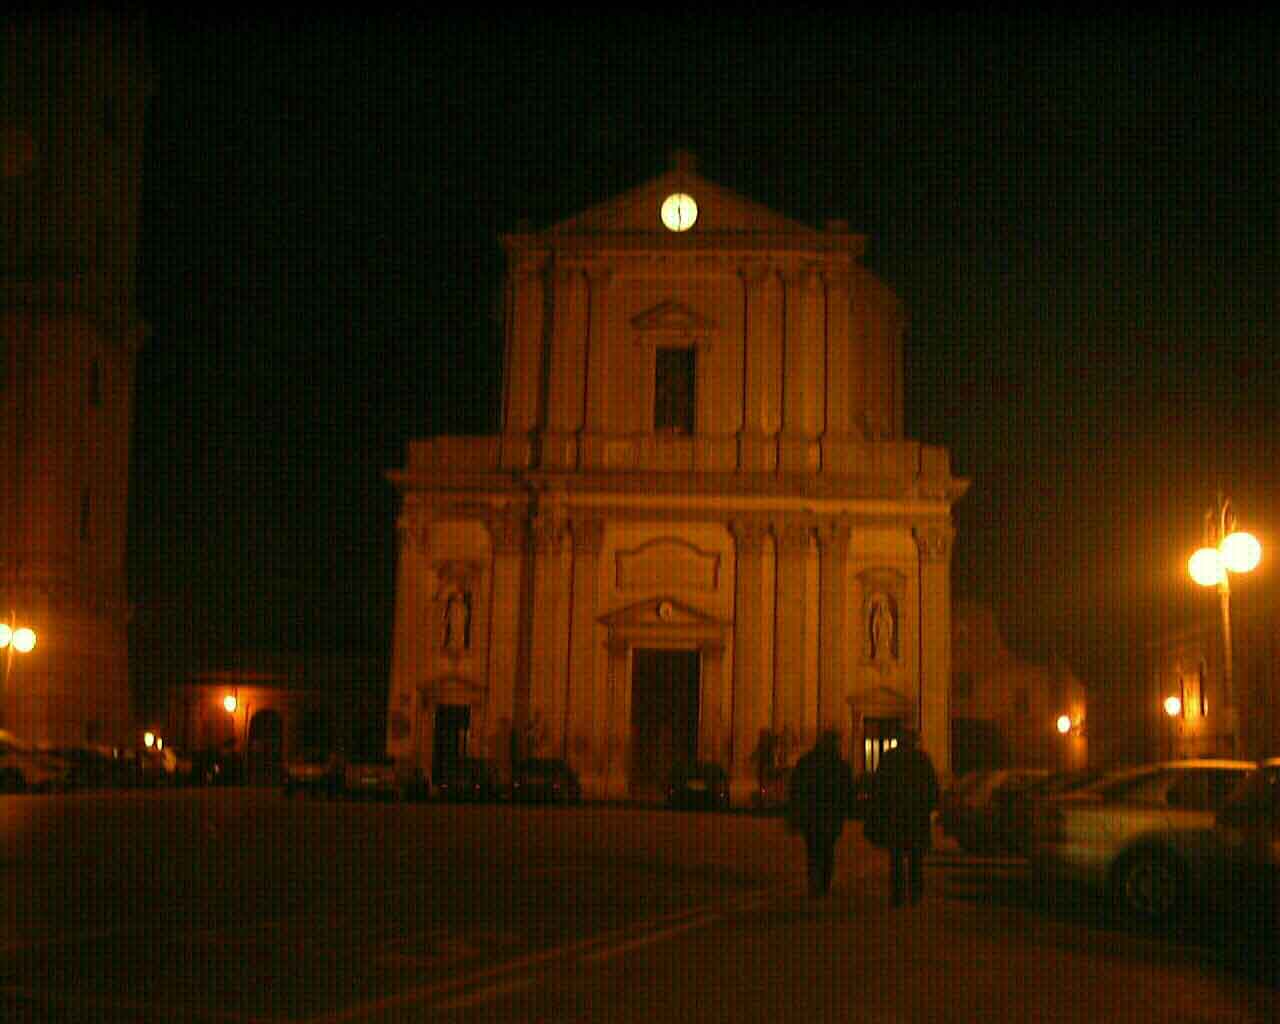 Piazza by night